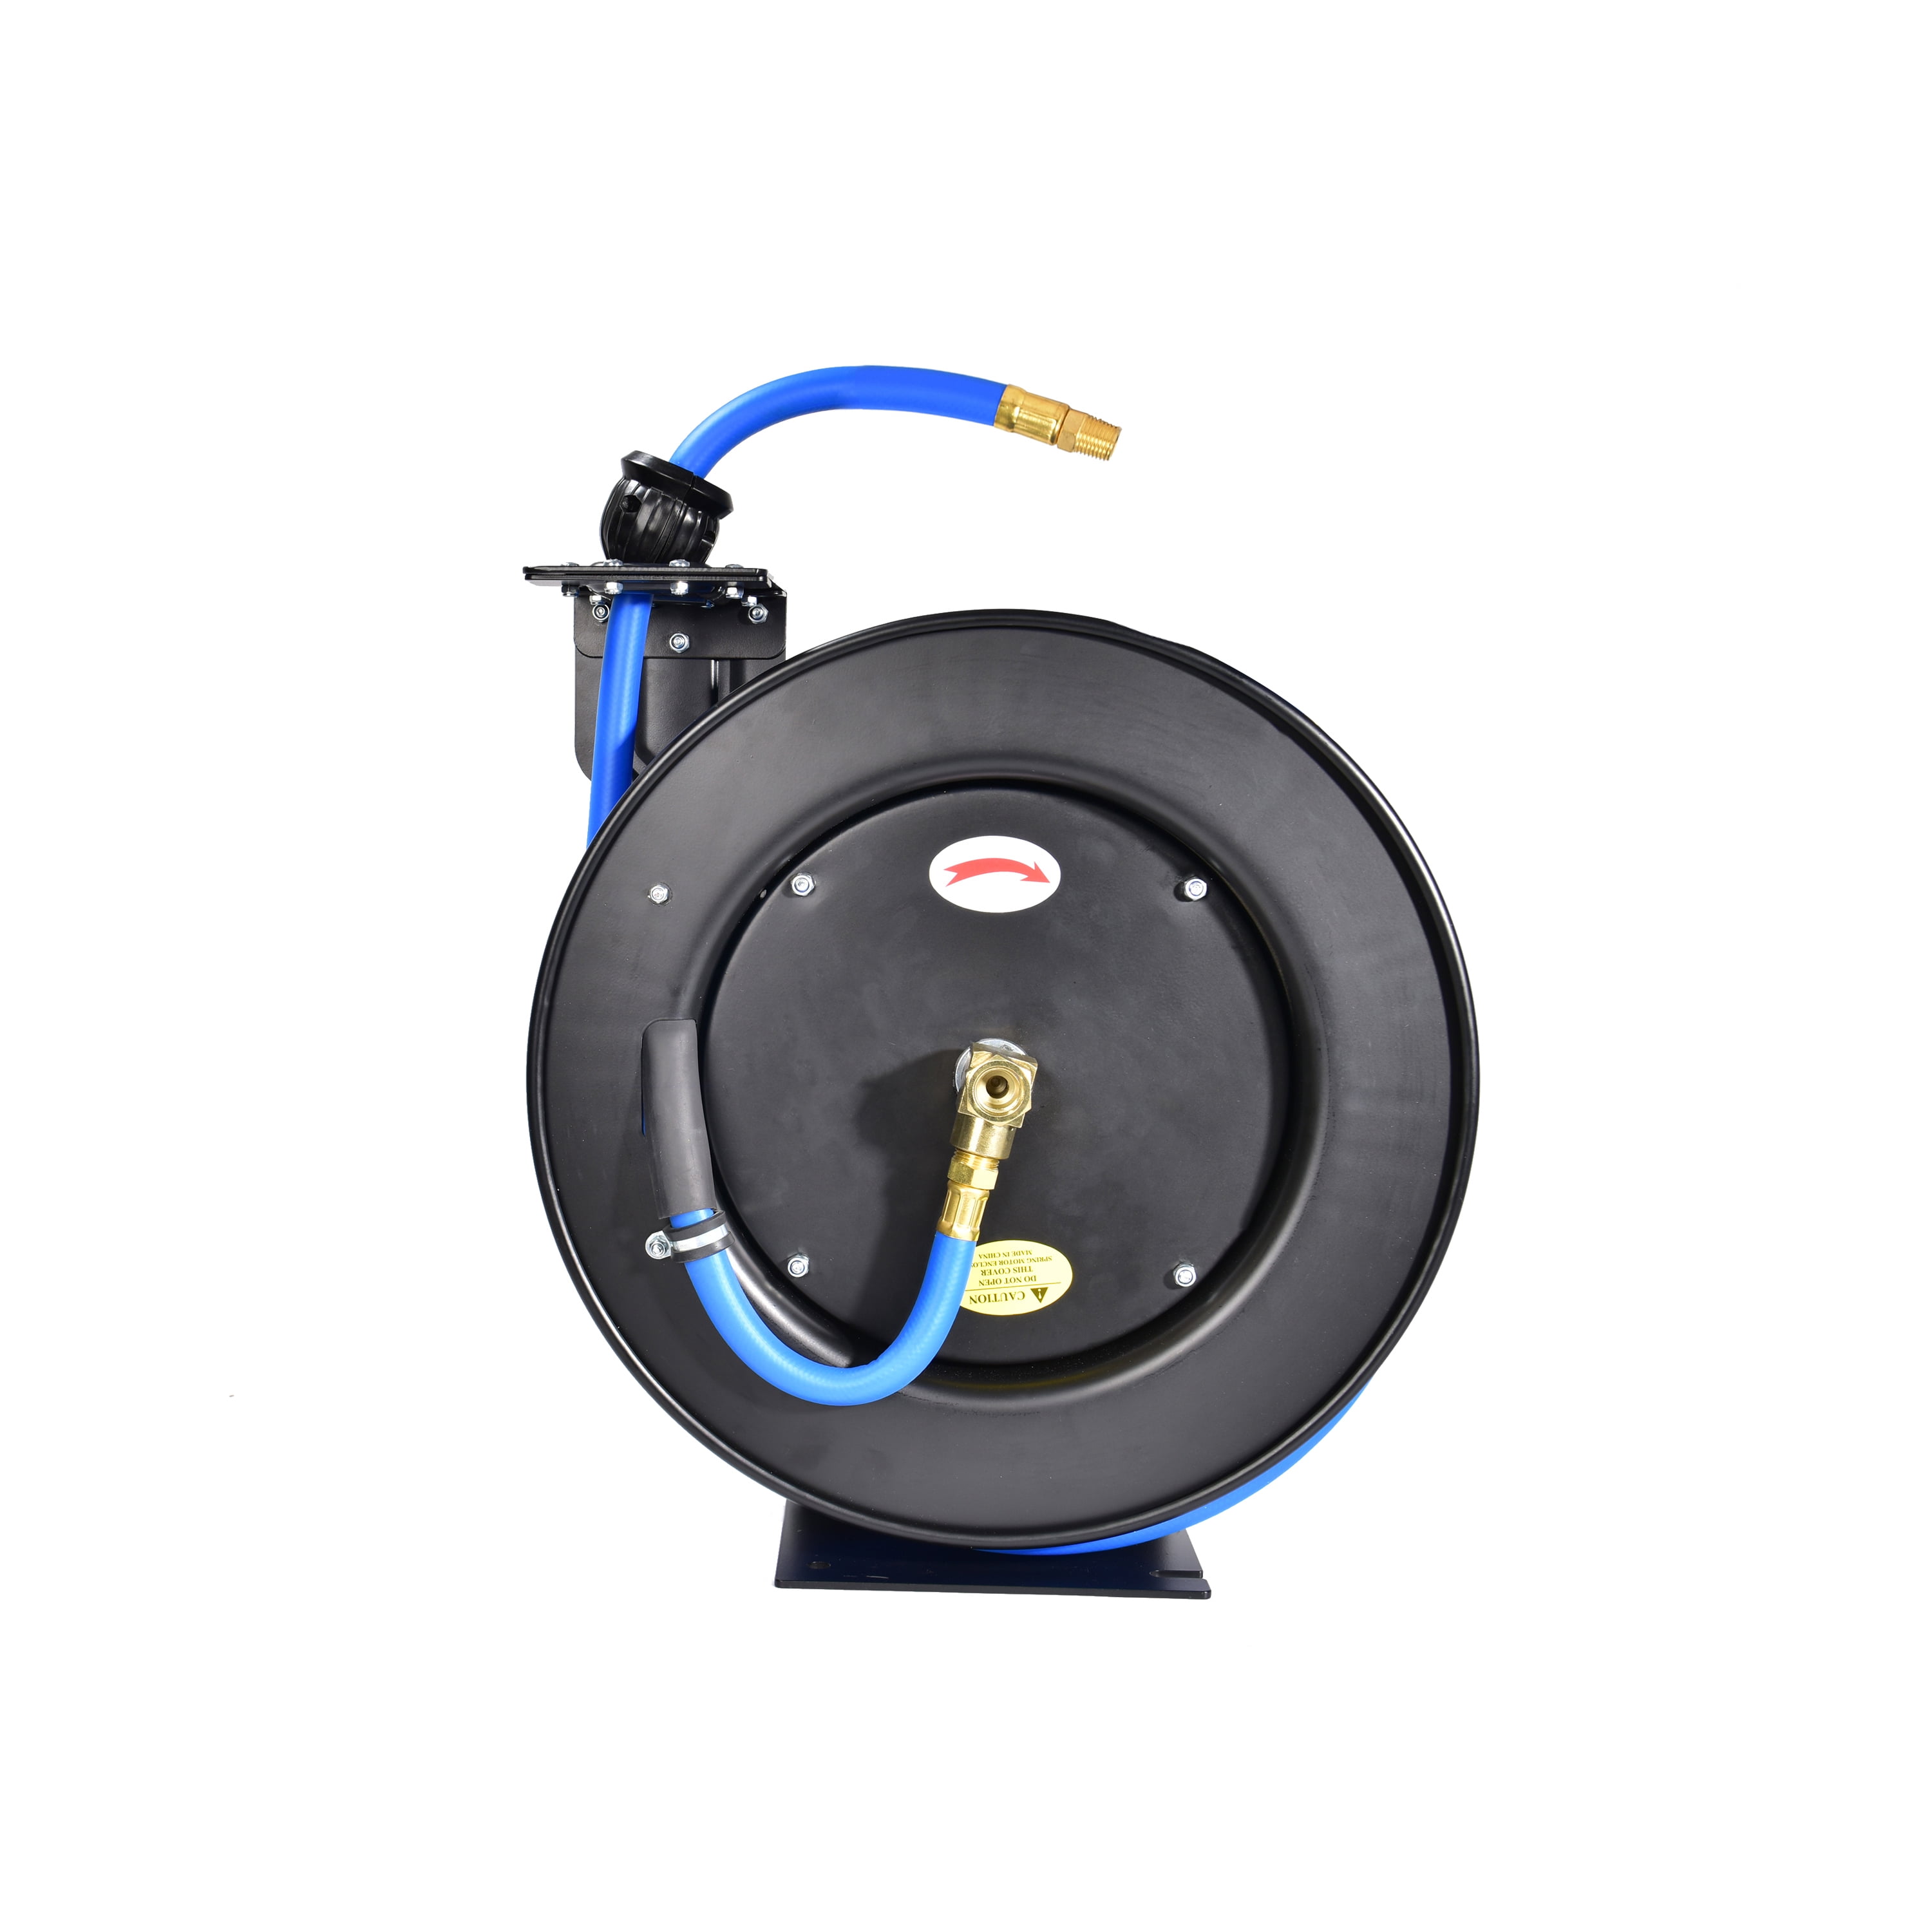 Retractable Air Hose Reel, 1/2 Inch x 50' Ft Wall Mount Auto